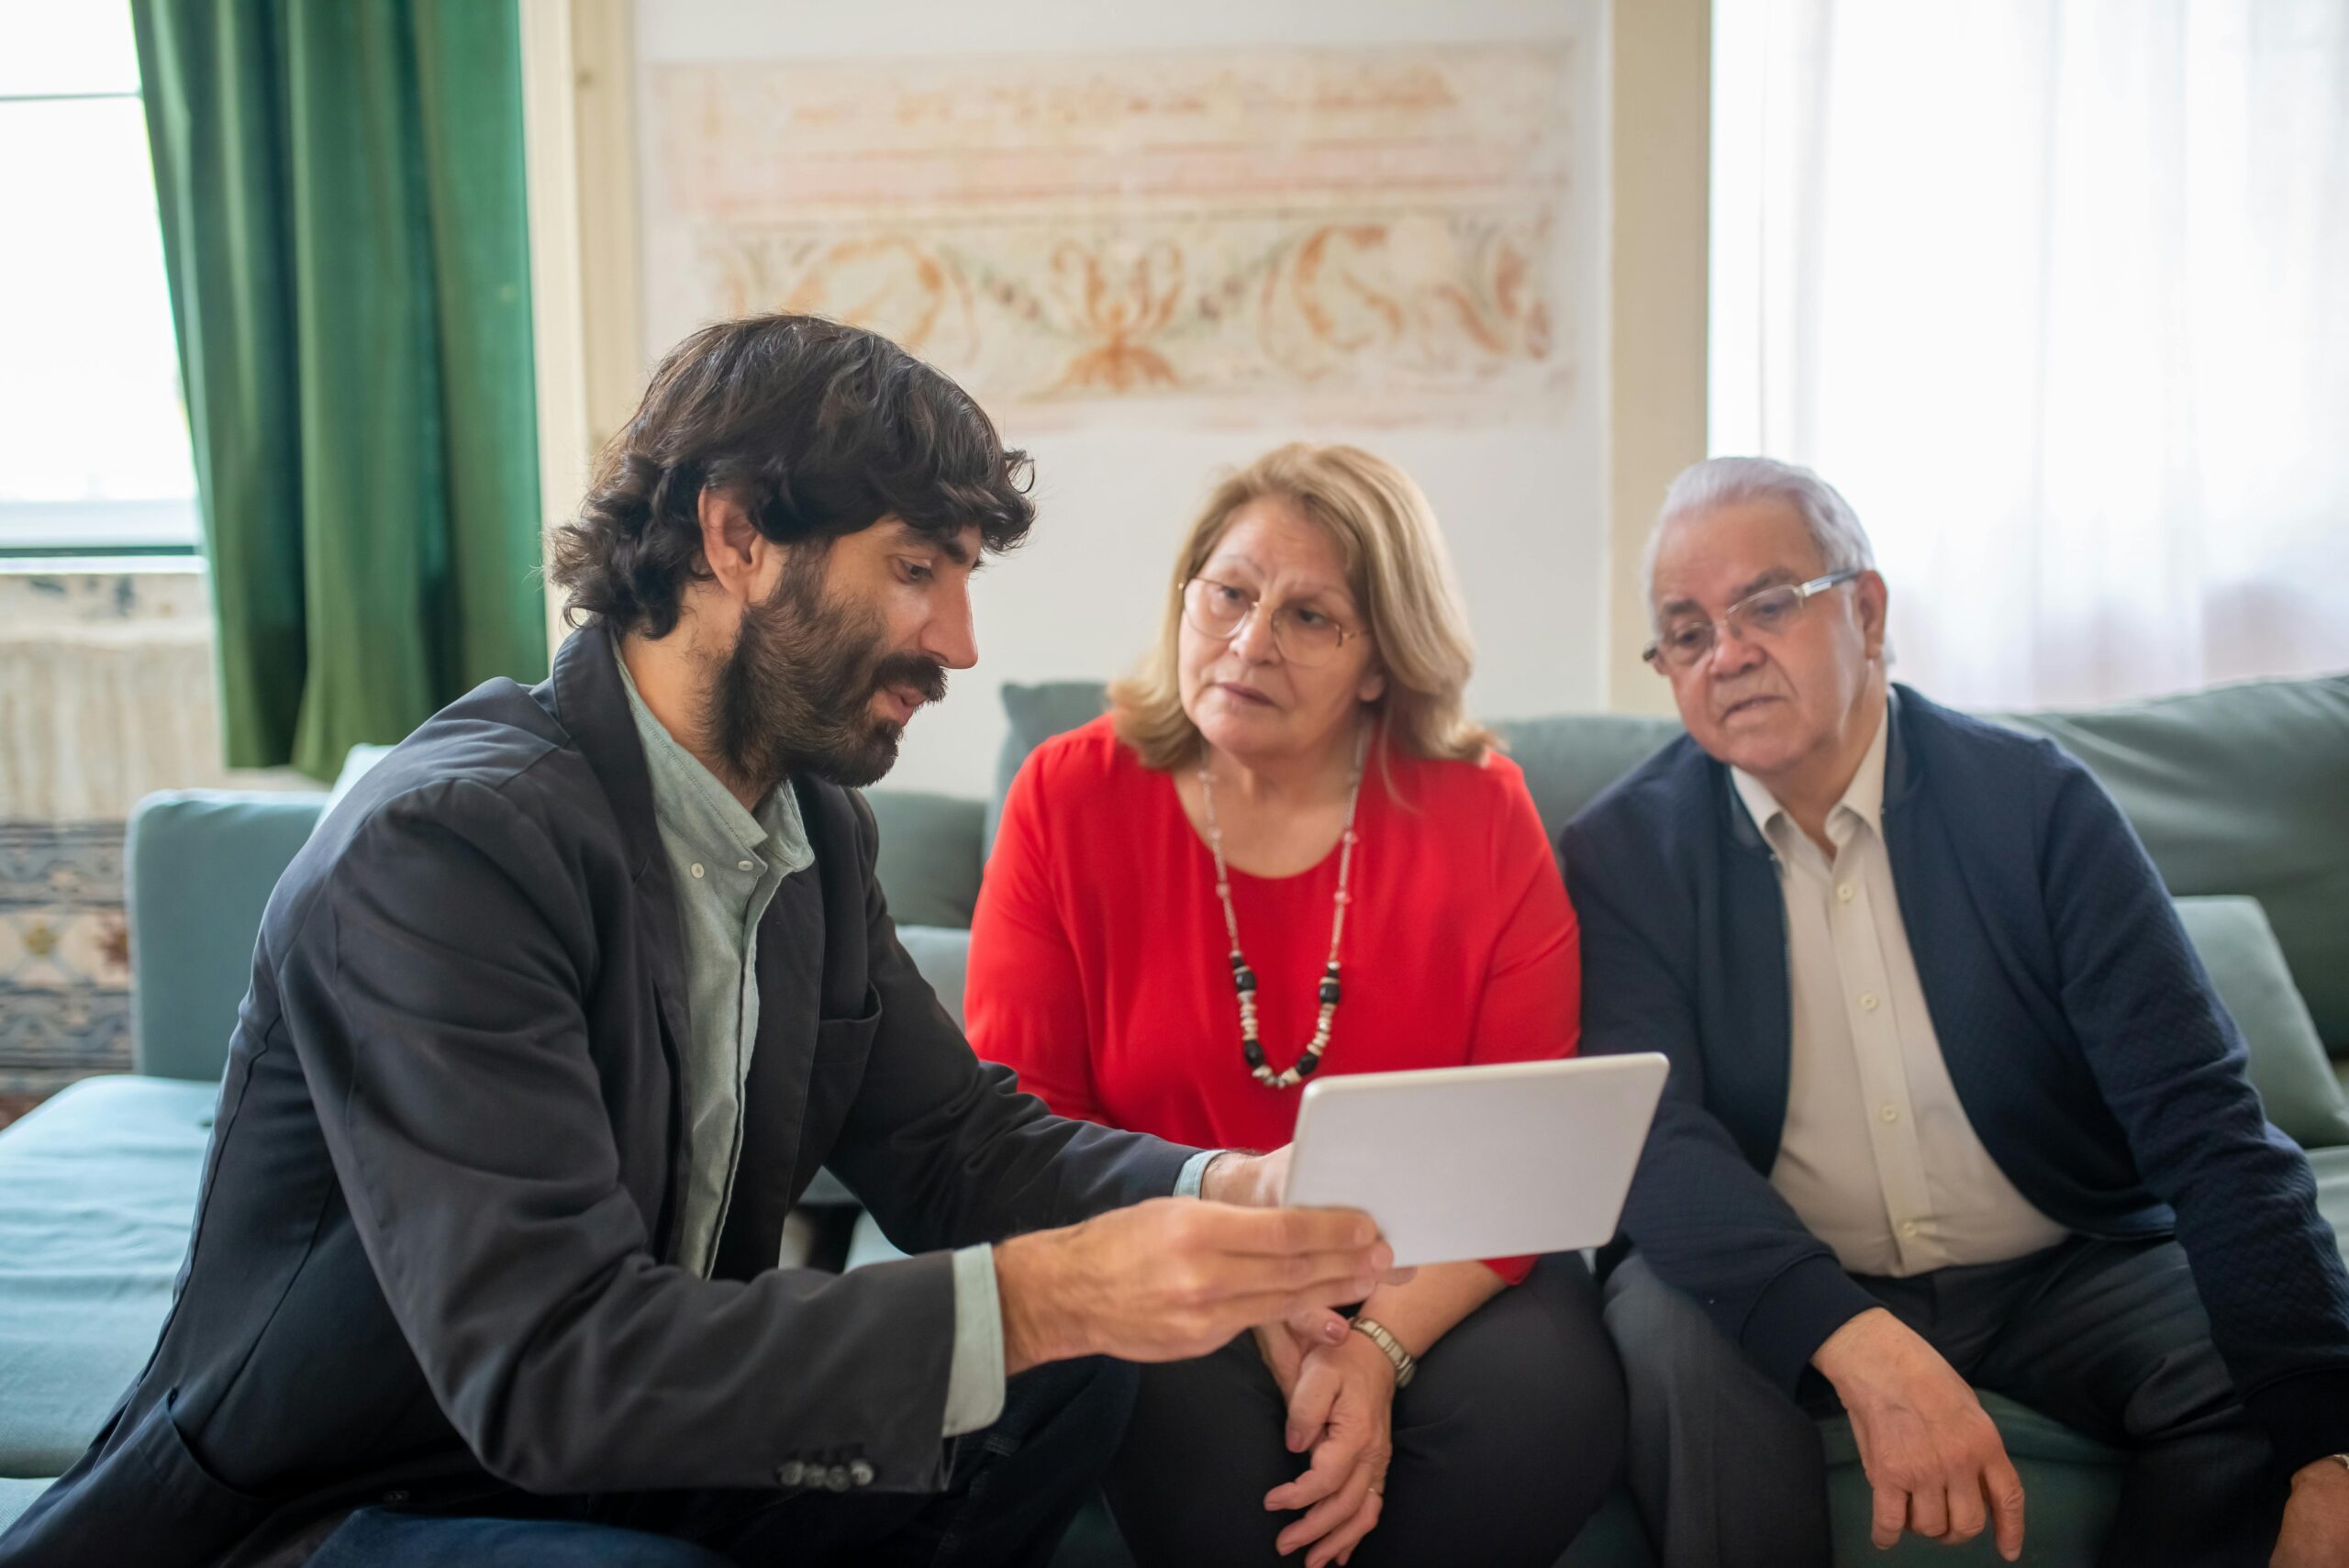 A man sitting and discussing paper work with his parents | Source: Pexels